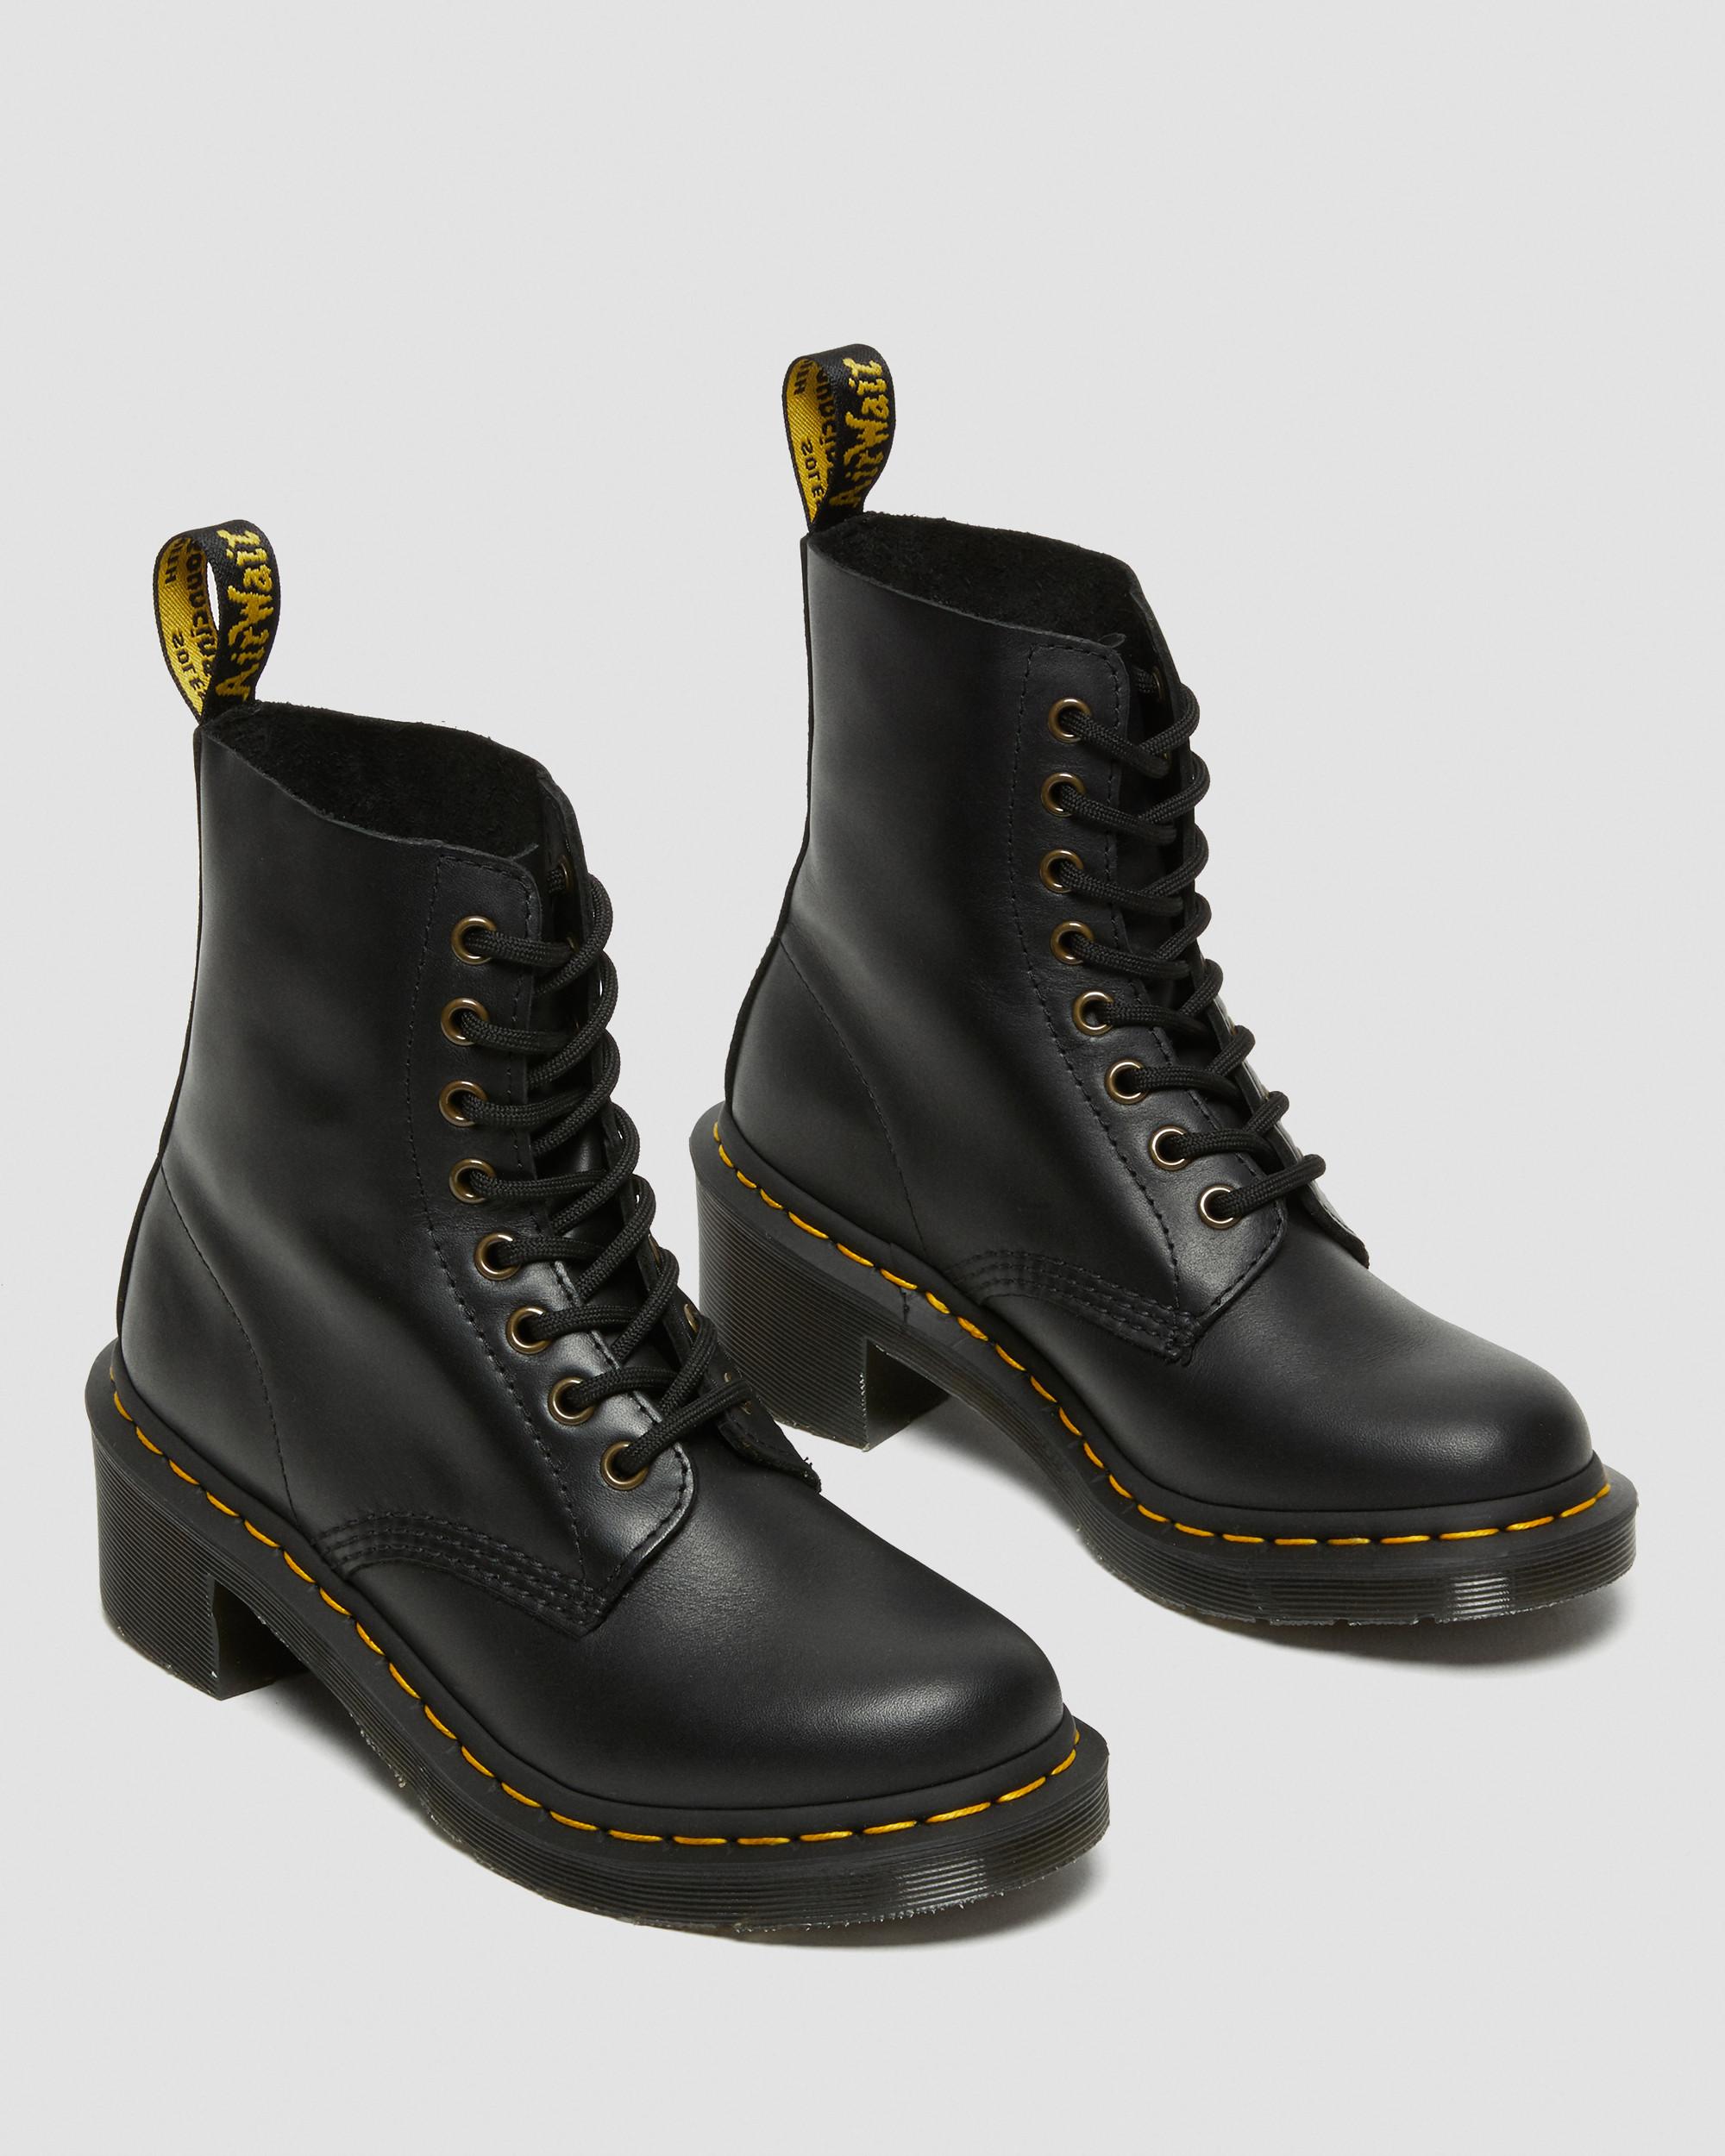 LEATHER HEELED LACE UP BOOTS | Dr. Martens